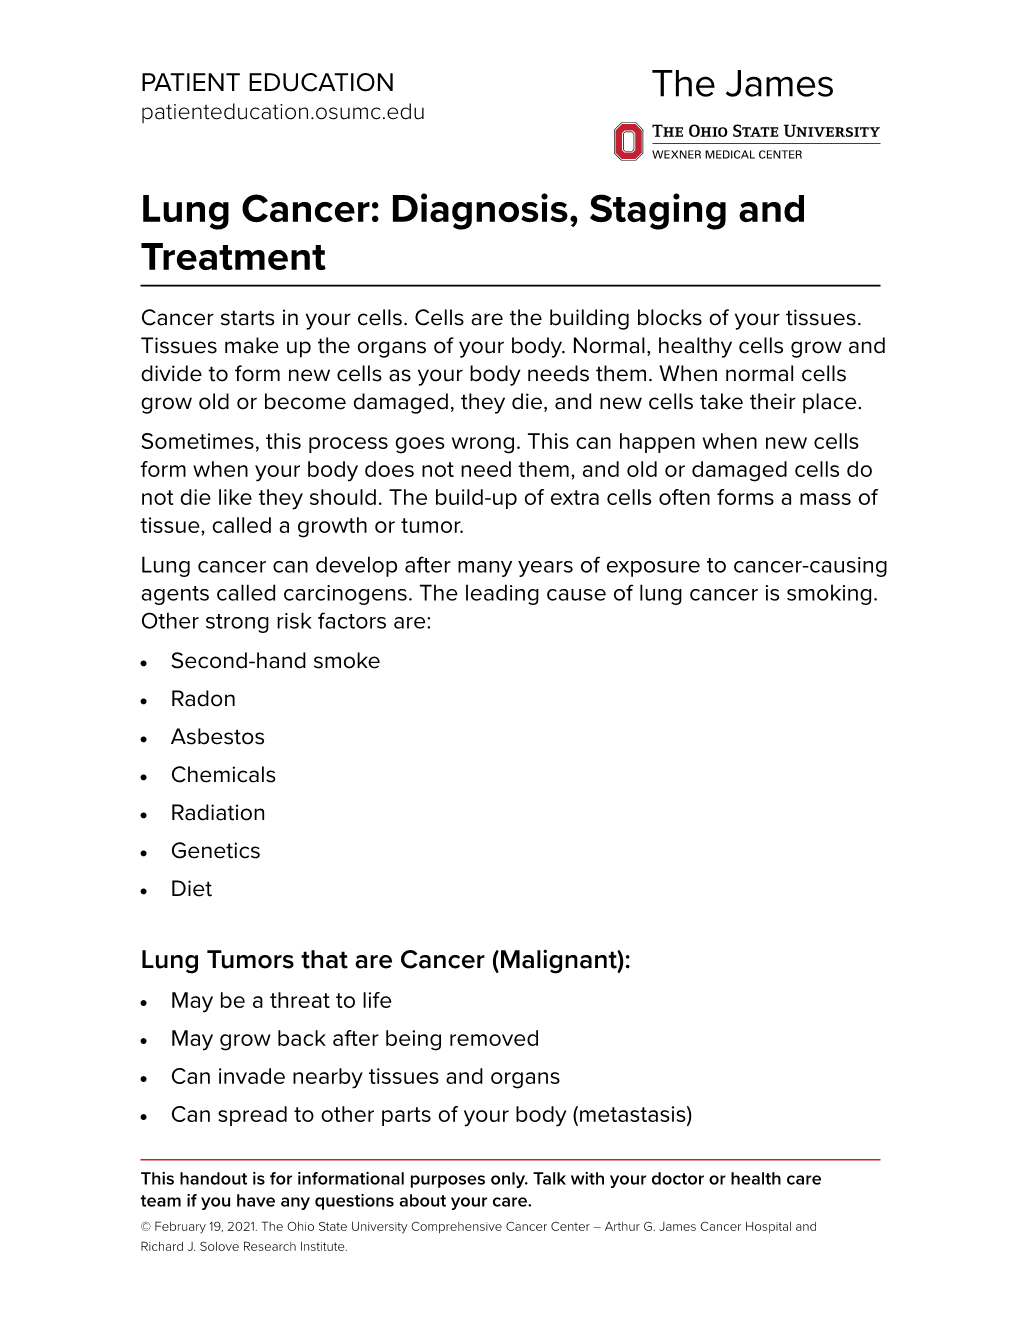 Lung Cancer: Diagnosis, Staging and Treatment